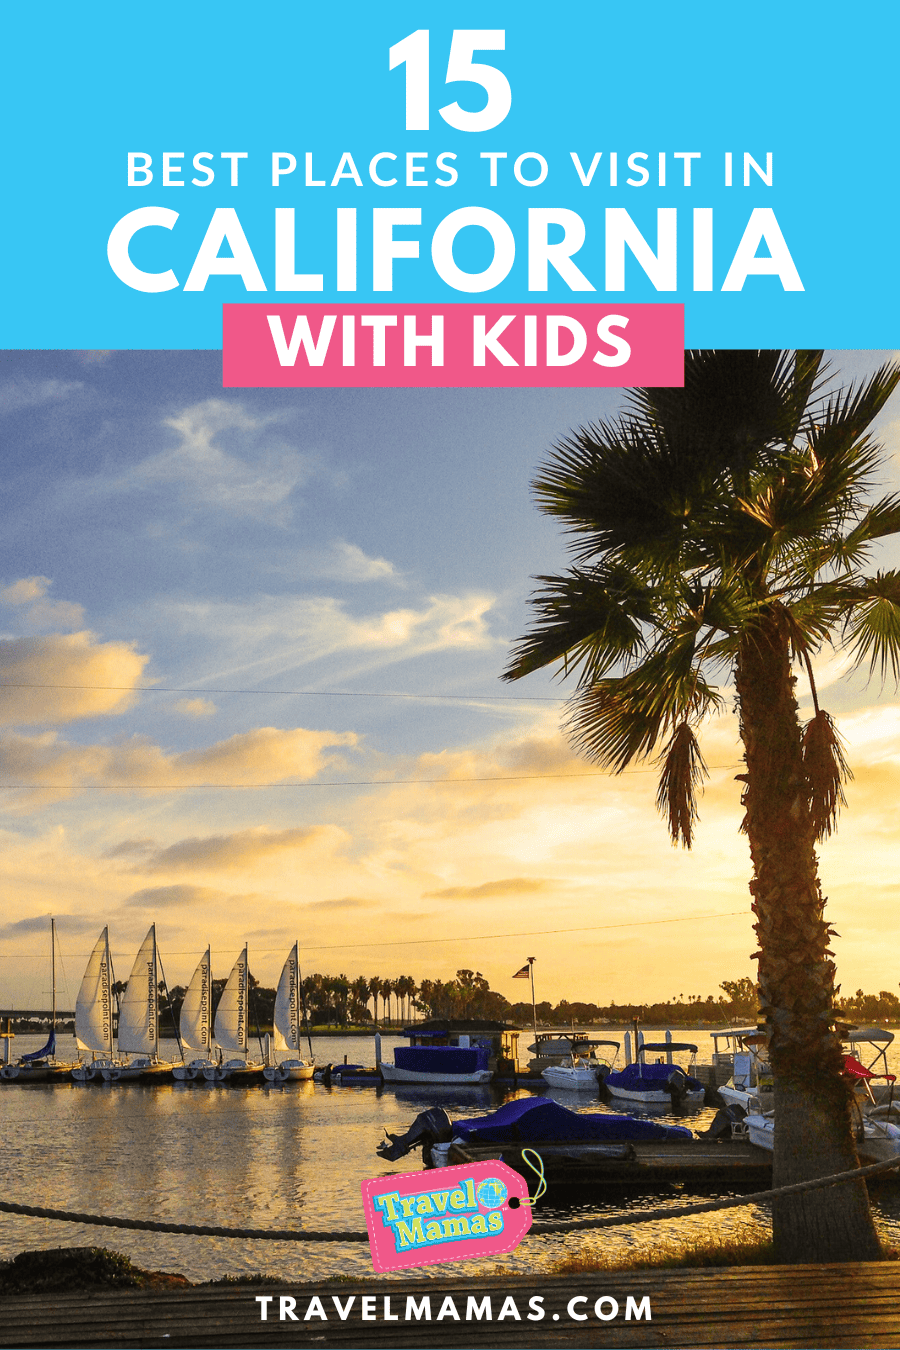 Best Places to Visit in California with Kids